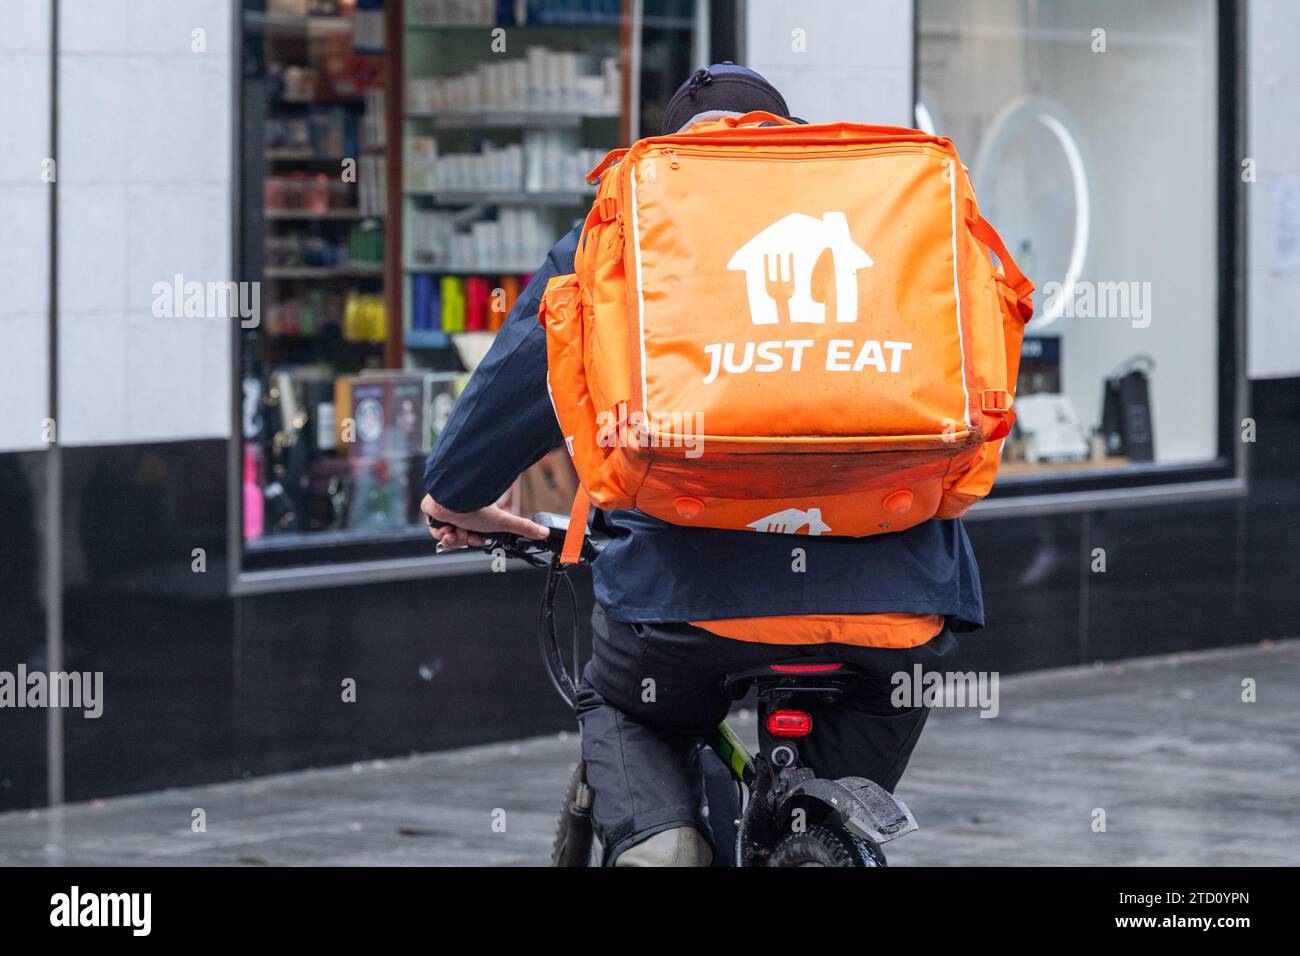 Just Eat rider on a push bike making a food delivery in Cork, Ireland. Stock Photo